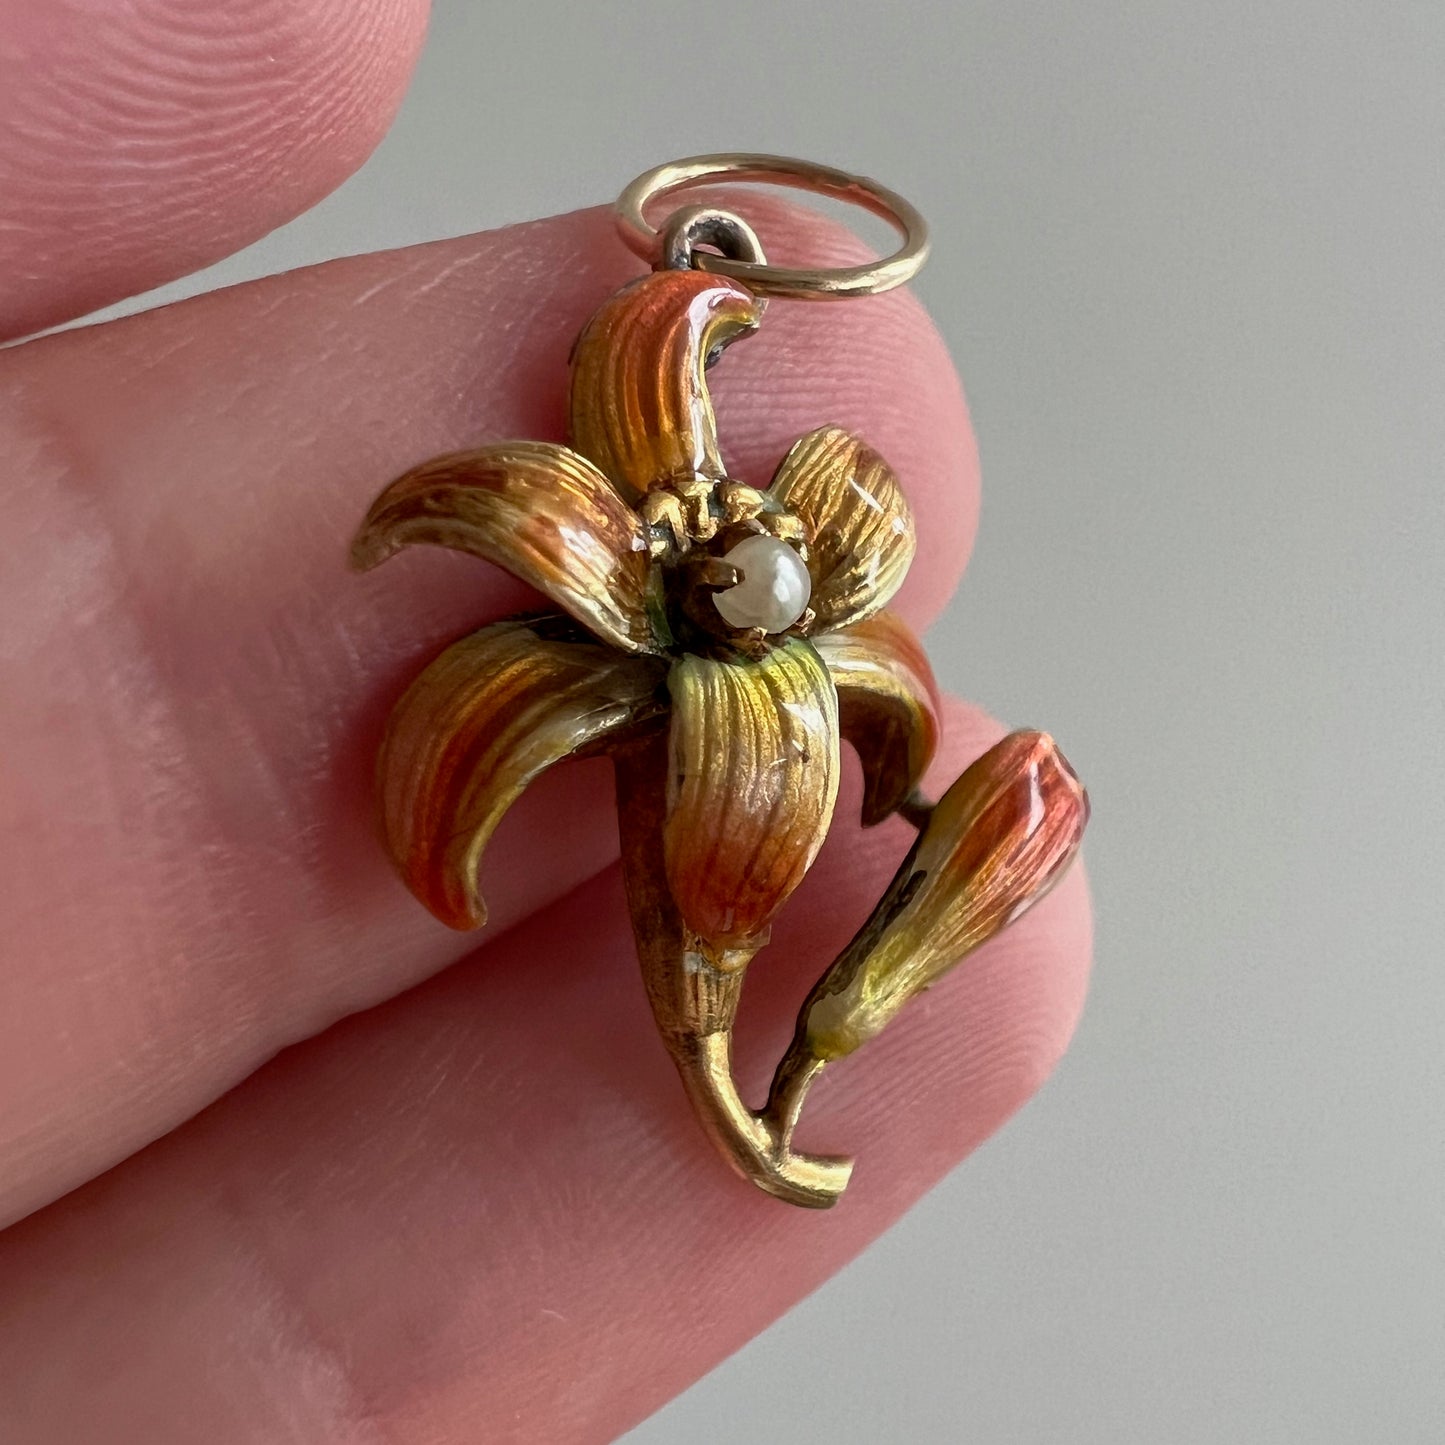 reimagined V I N T A G E // orange lily / solid 14k yellow gold and enamel orange flower with pearl / stick pin conversion pendant